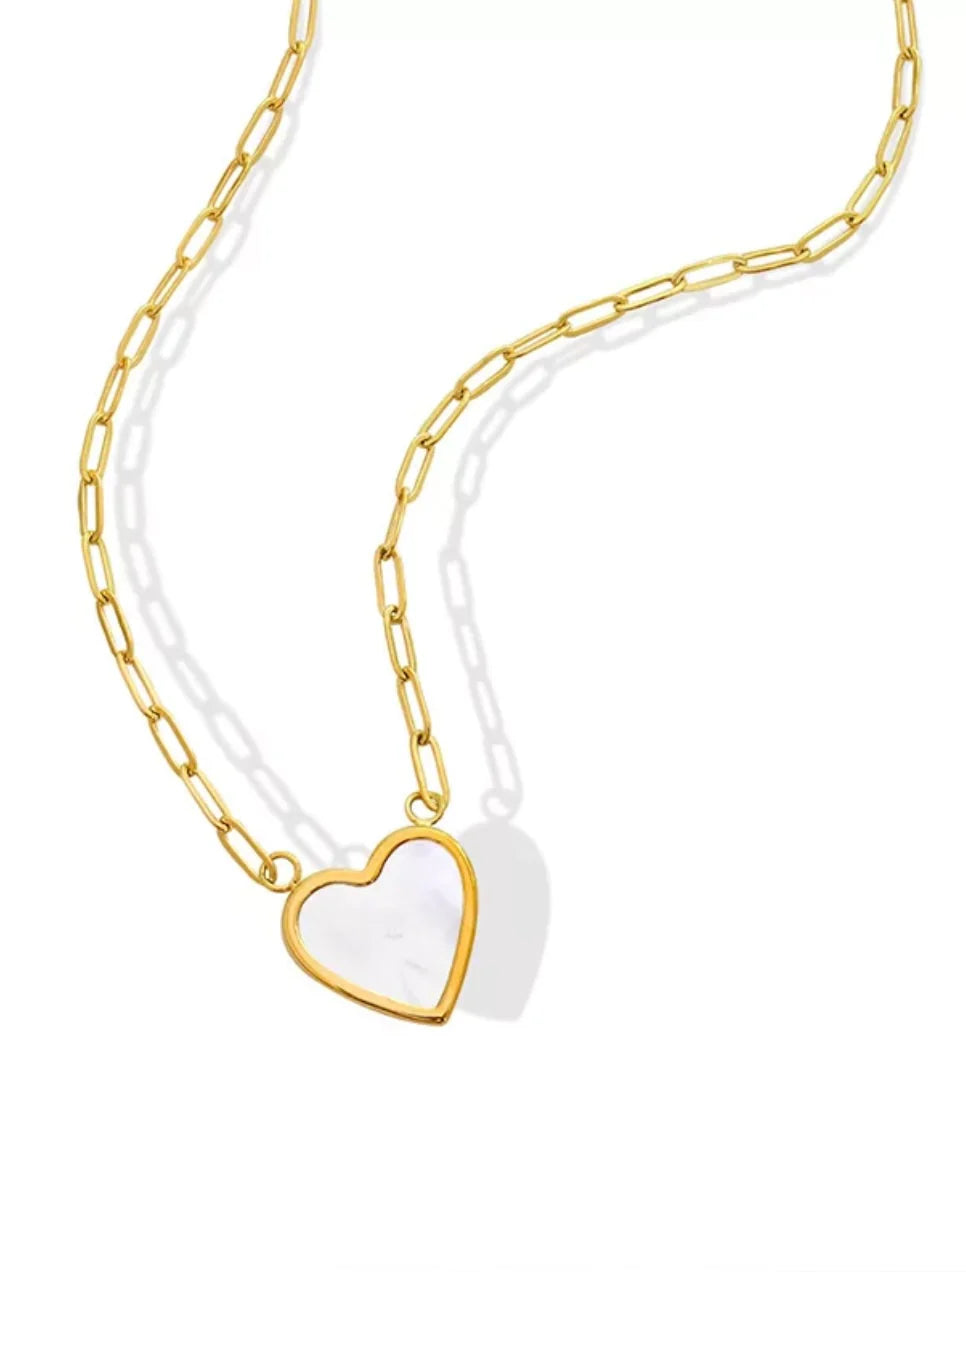 The White Heart Gold Necklace